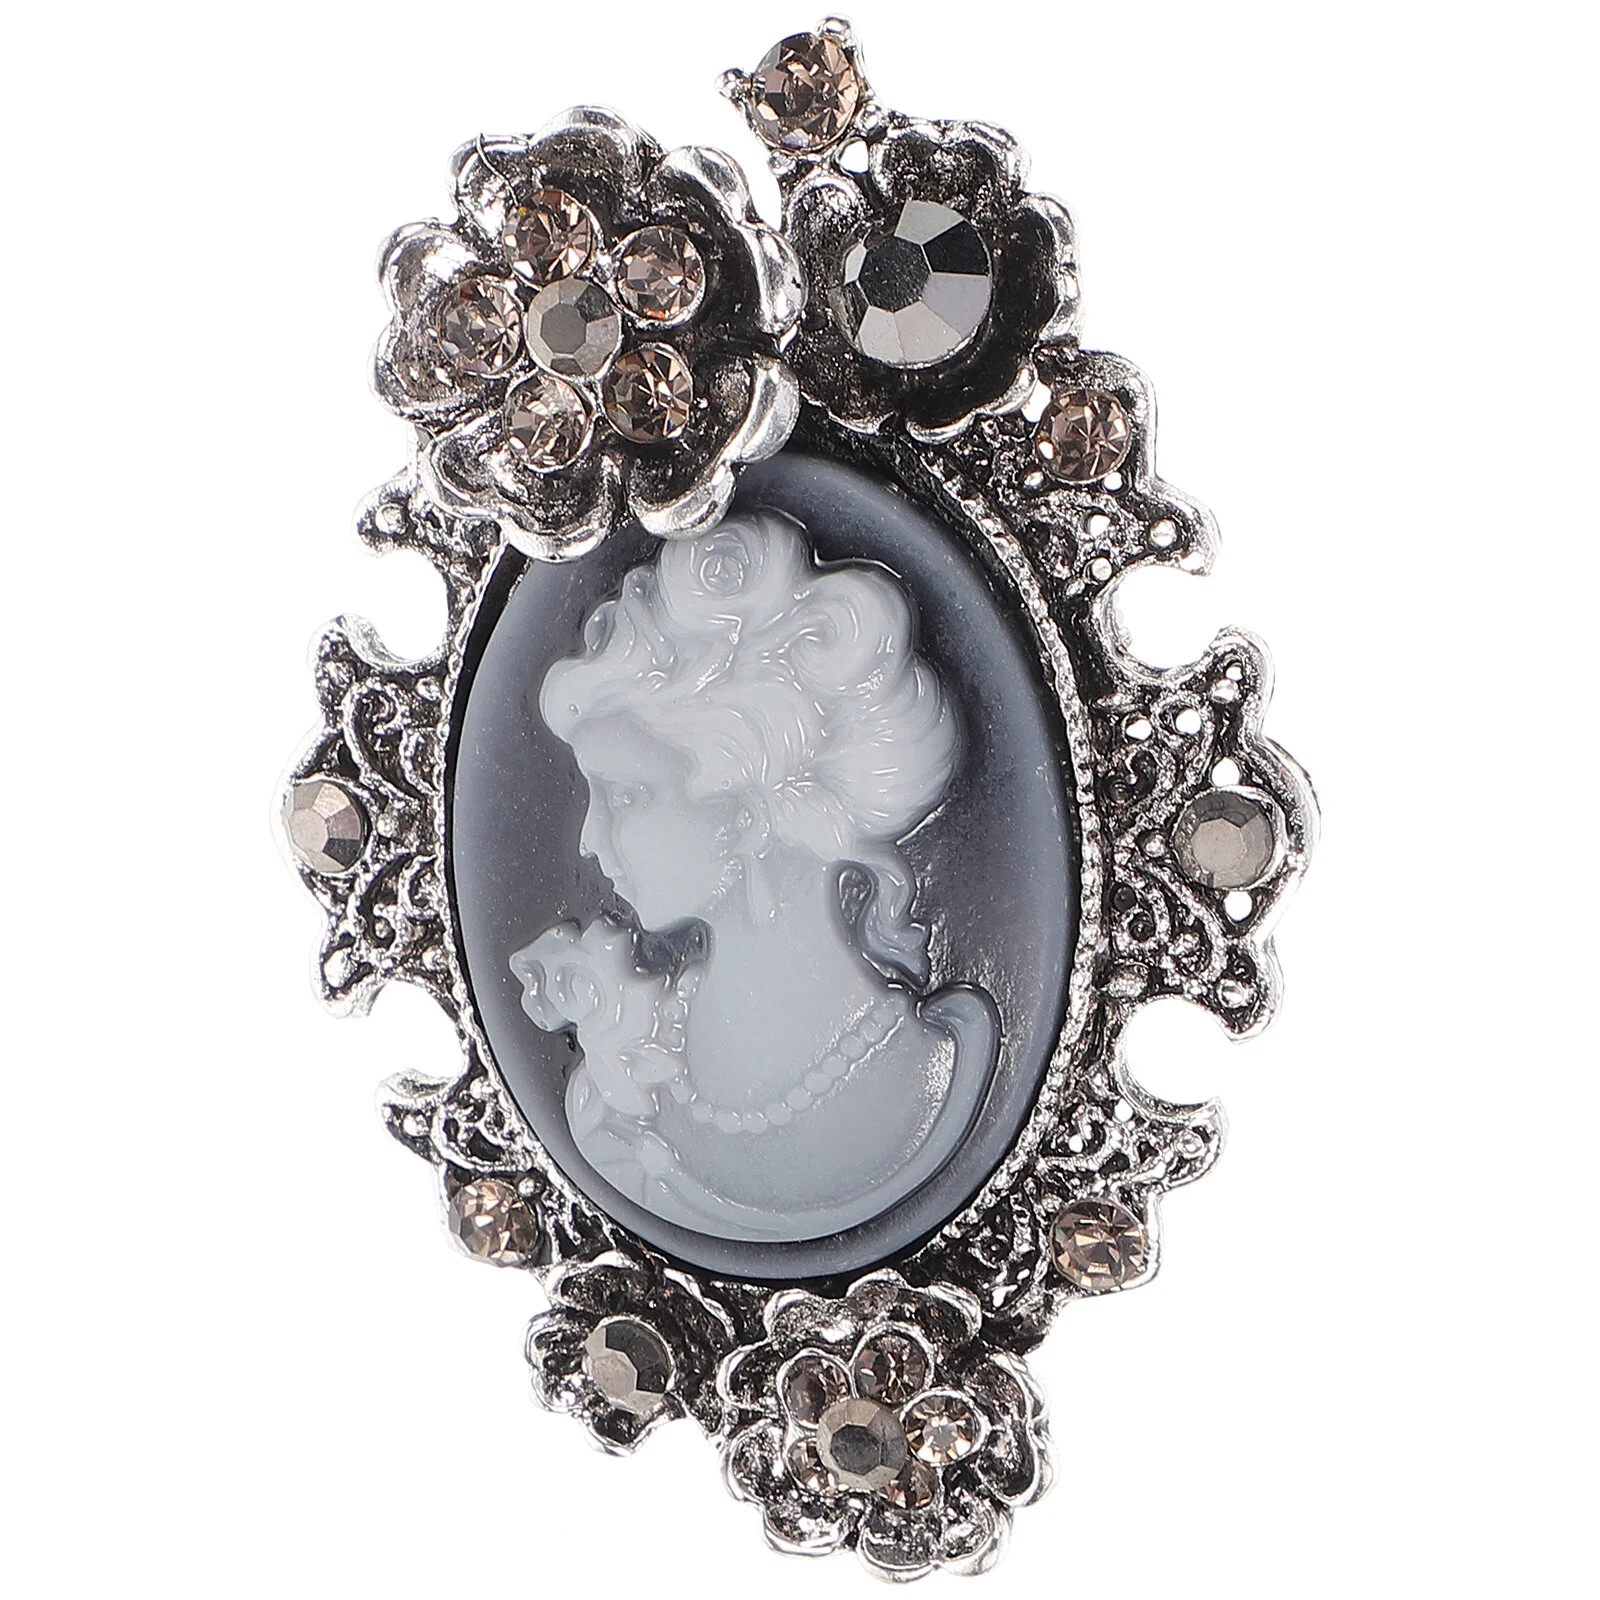 

Beauty Head Brooch Gifts Women Birthday Unique Costume Jewelry Fashion Pin Hats Victorian Brooches